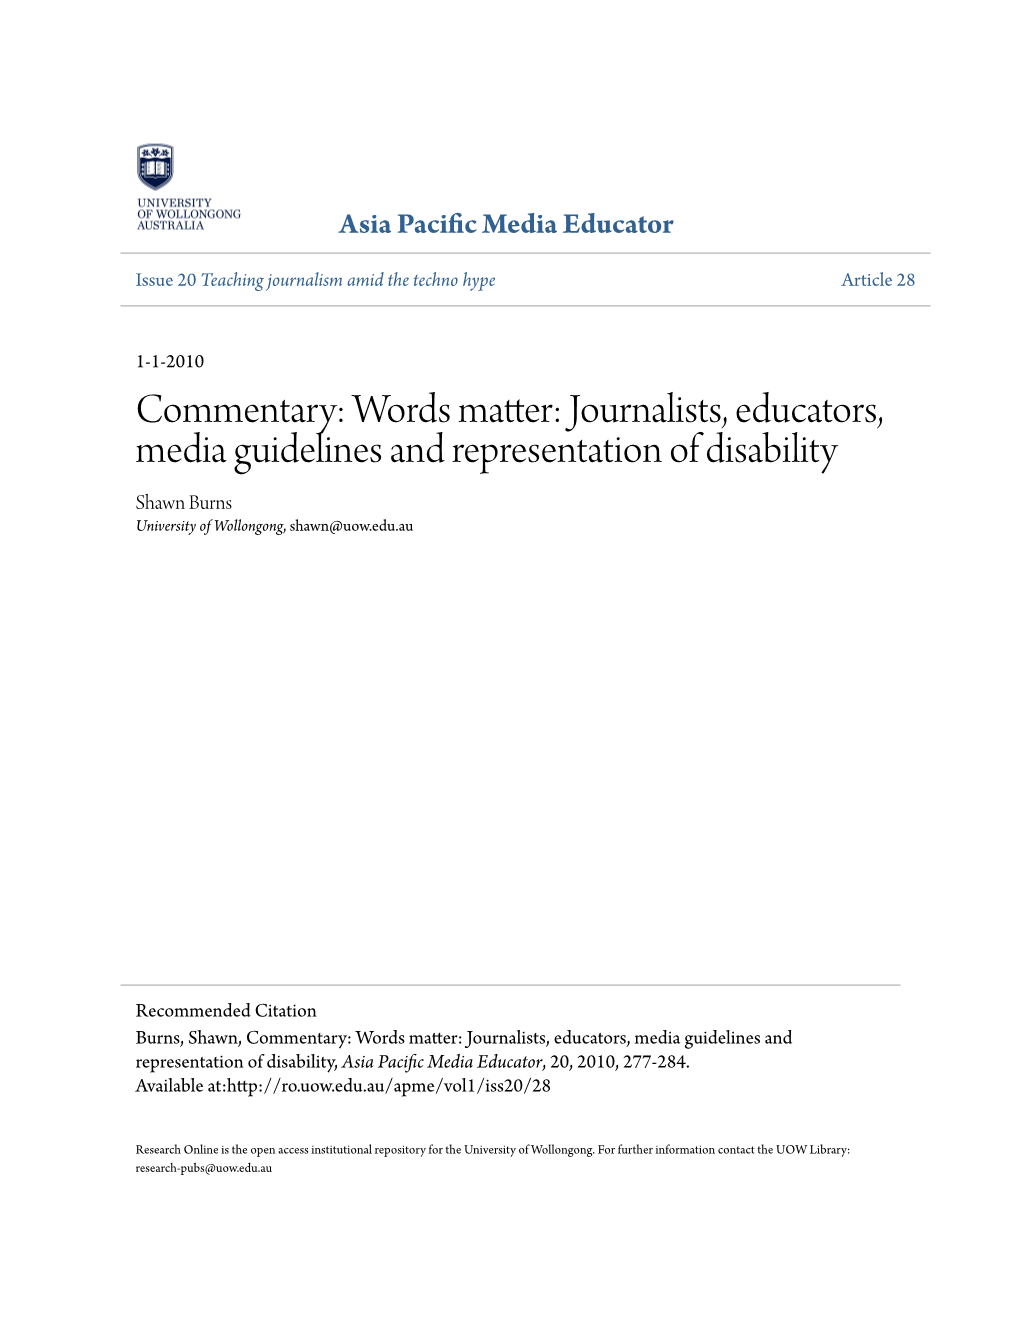 Words Matter: Journalists, Educators, Media Guidelines and Representation of Disability Shawn Burns University of Wollongong, Shawn@Uow.Edu.Au